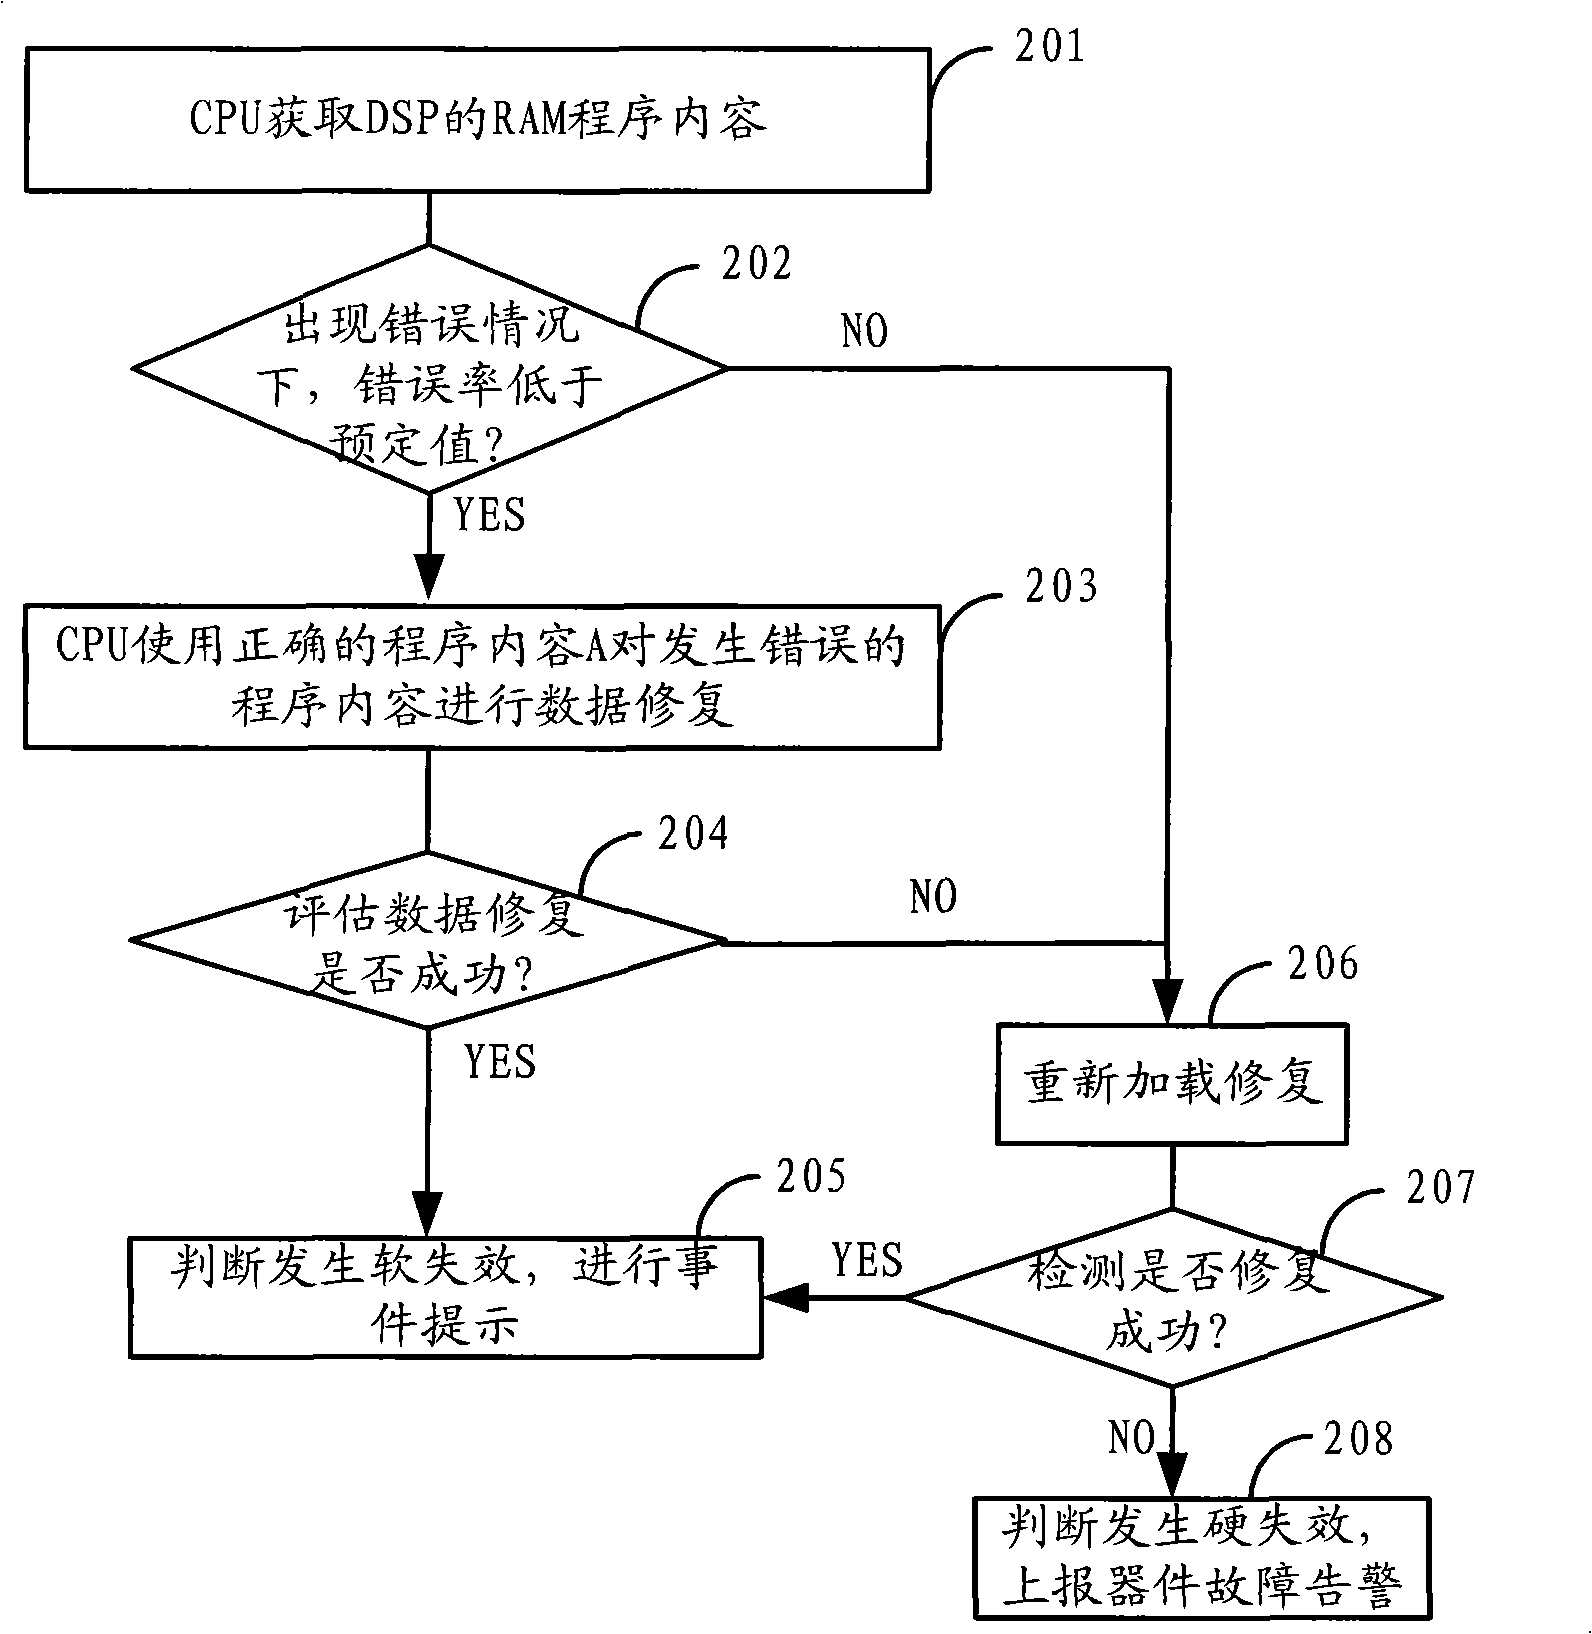 Random storage failure detecting and processing method, device and system